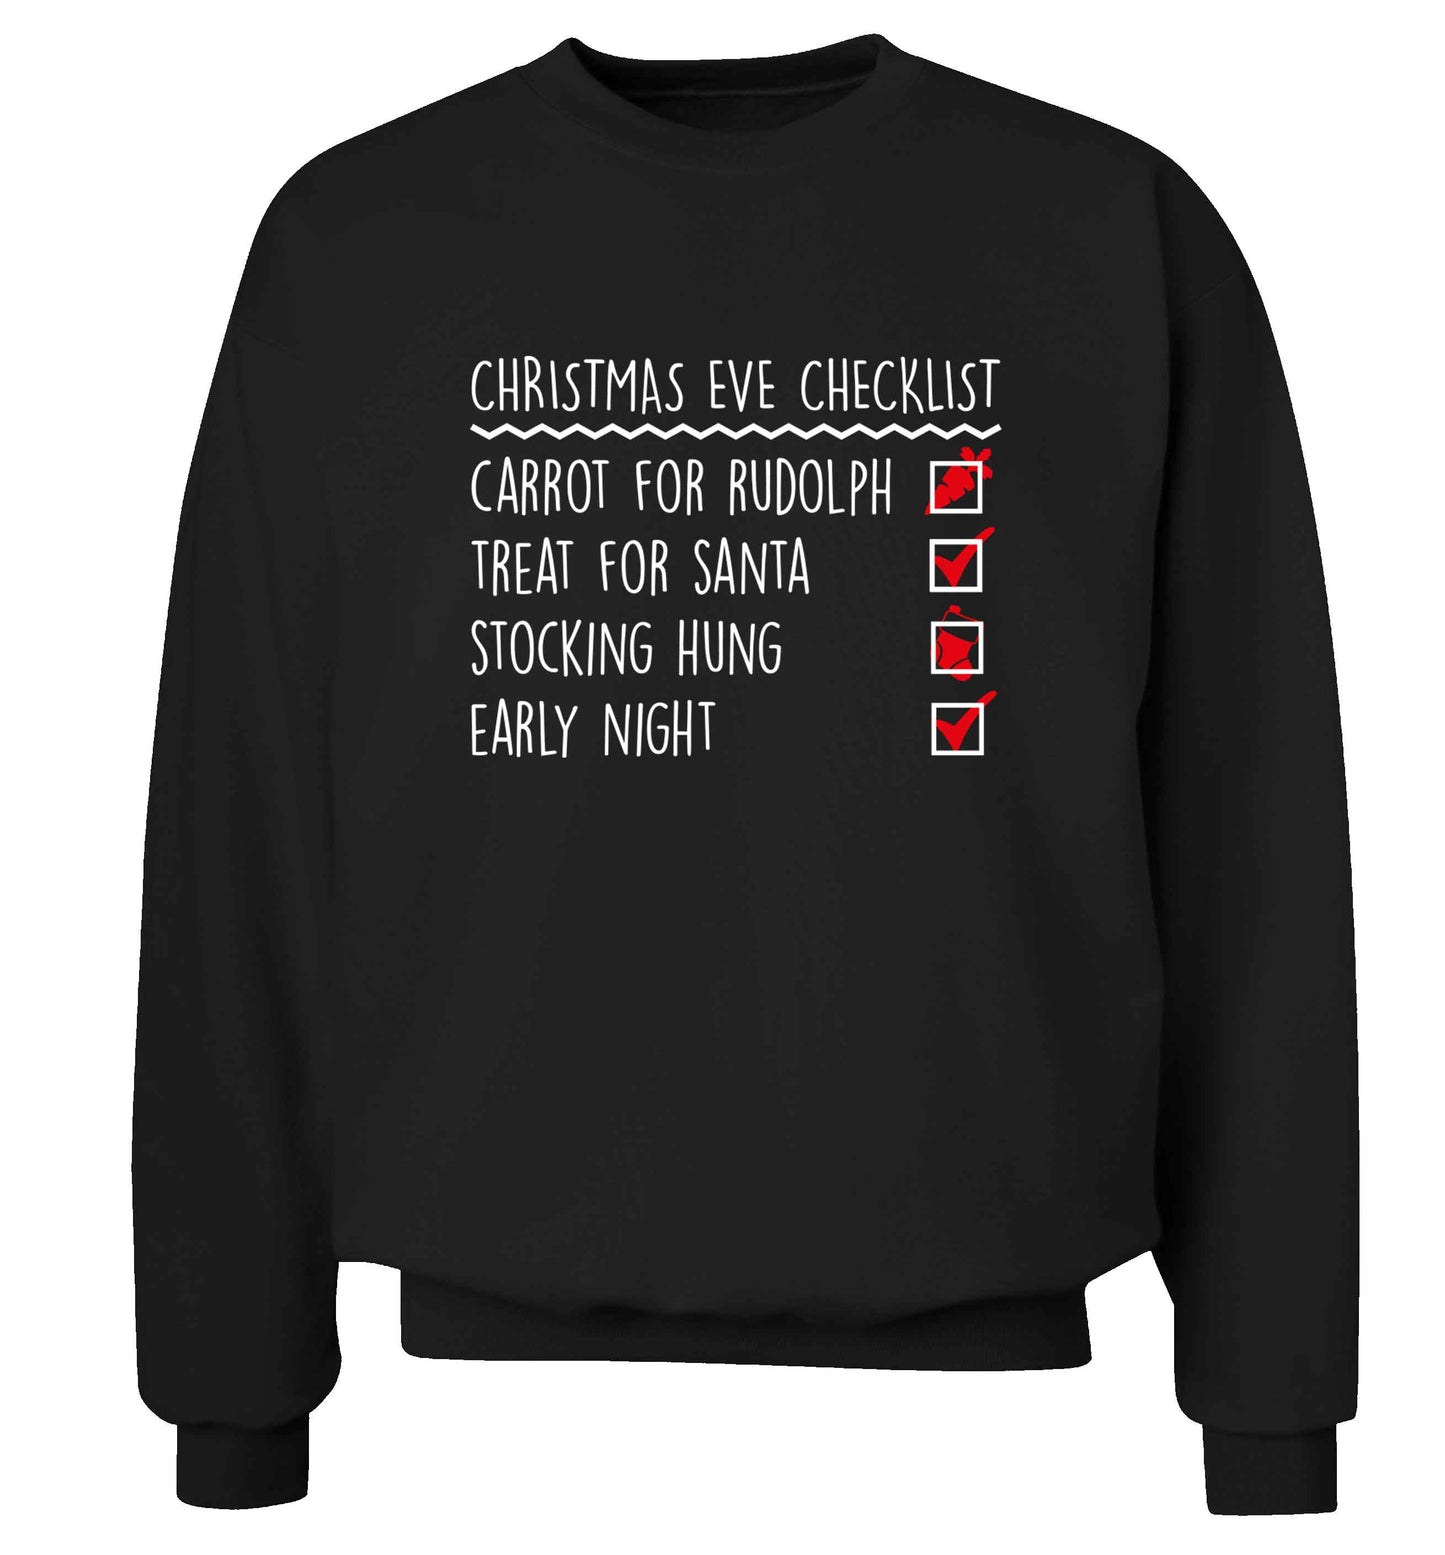 Candy Canes Candy Corns adult's unisex black sweater 2XL